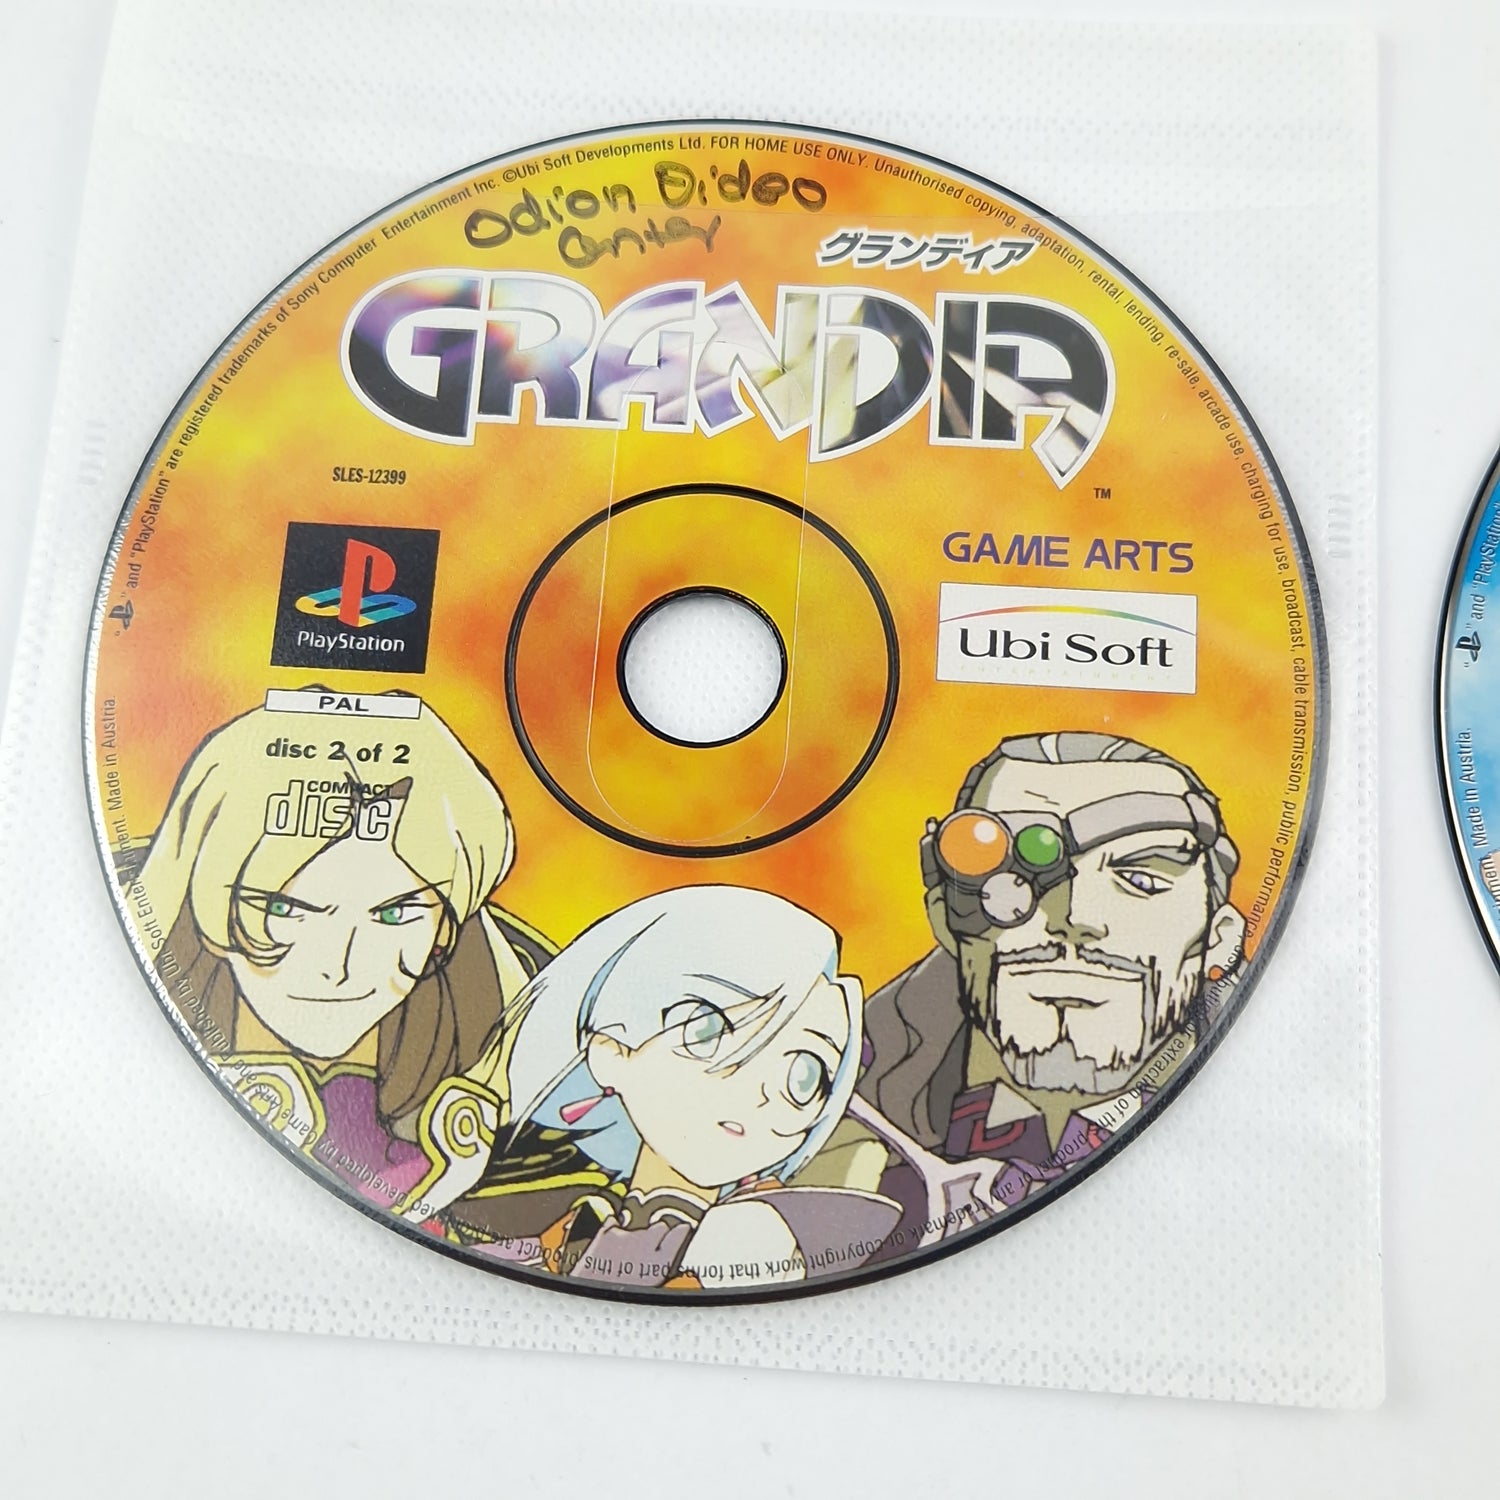 Playstation 1 game: Grandia - CDs with instructions without original packaging / PS1